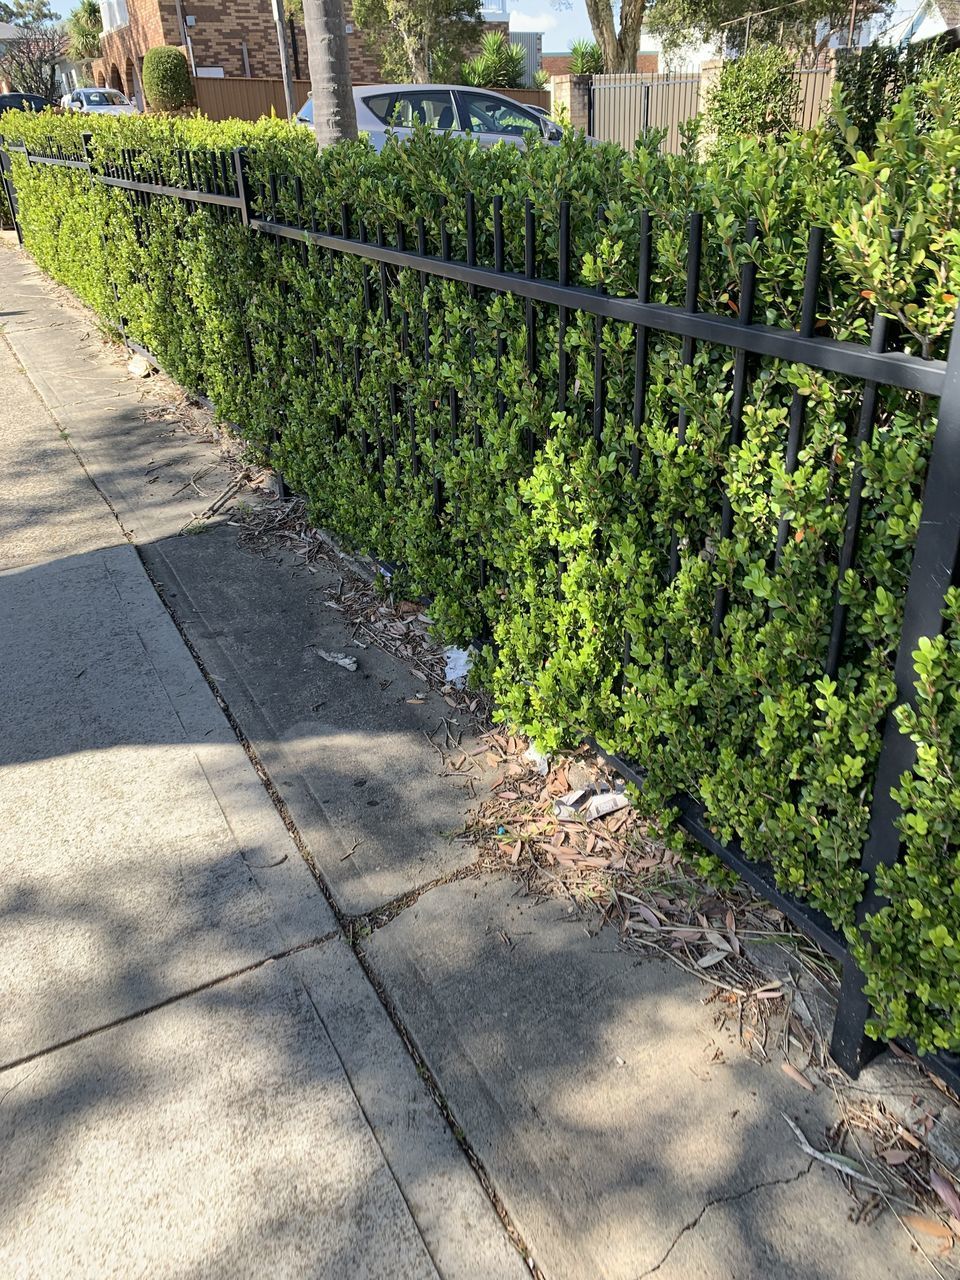 VIEW OF FOOTPATH BY FENCE IN CITY